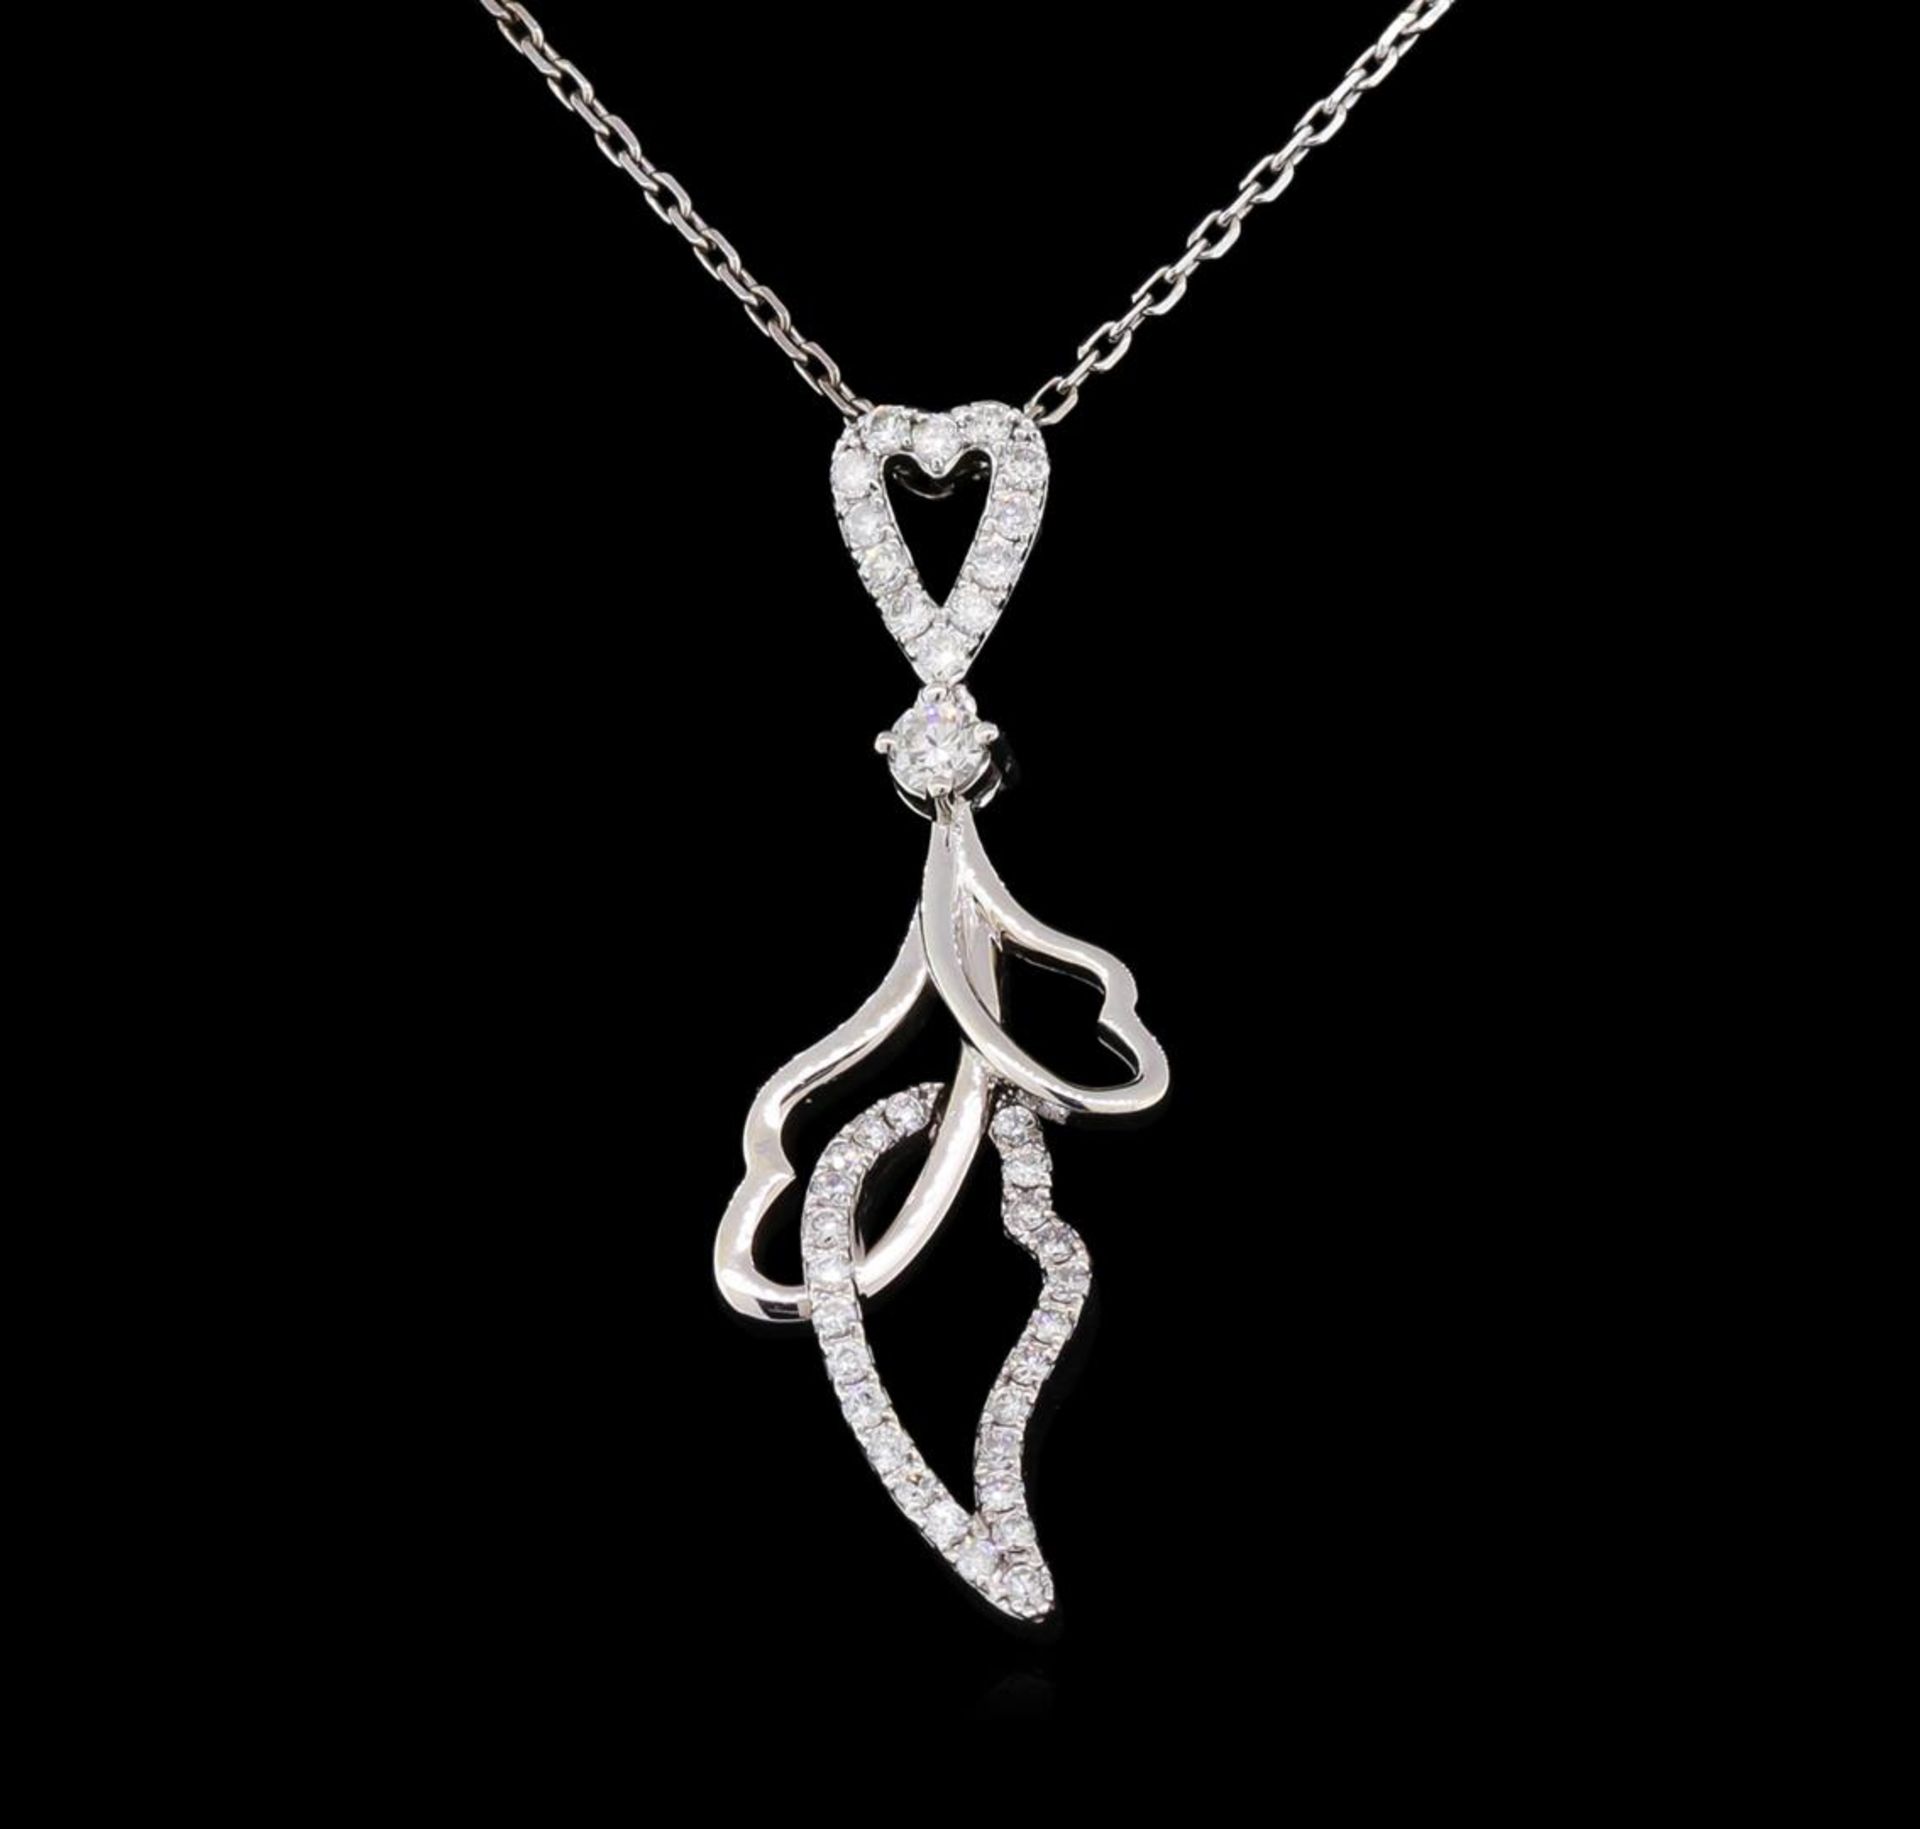 0.55 ctw Diamond Necklace - 14KT White Gold - Image 2 of 2